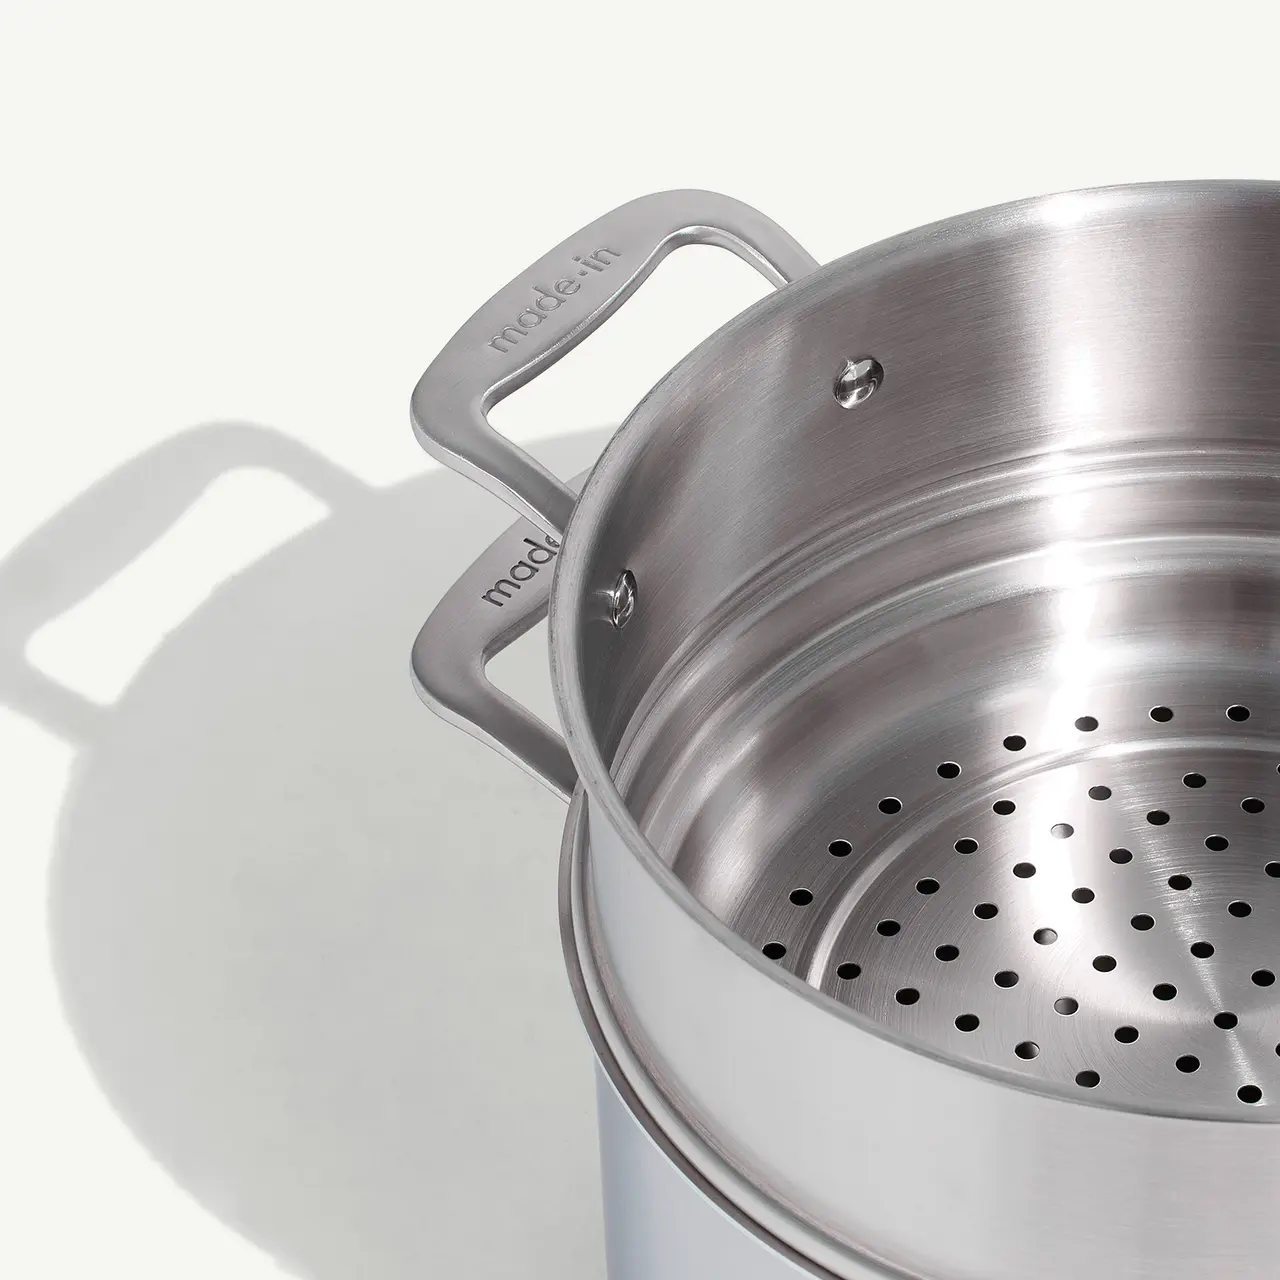 A stainless steel pot with a steamer insert is casting a shadow on a white surface.